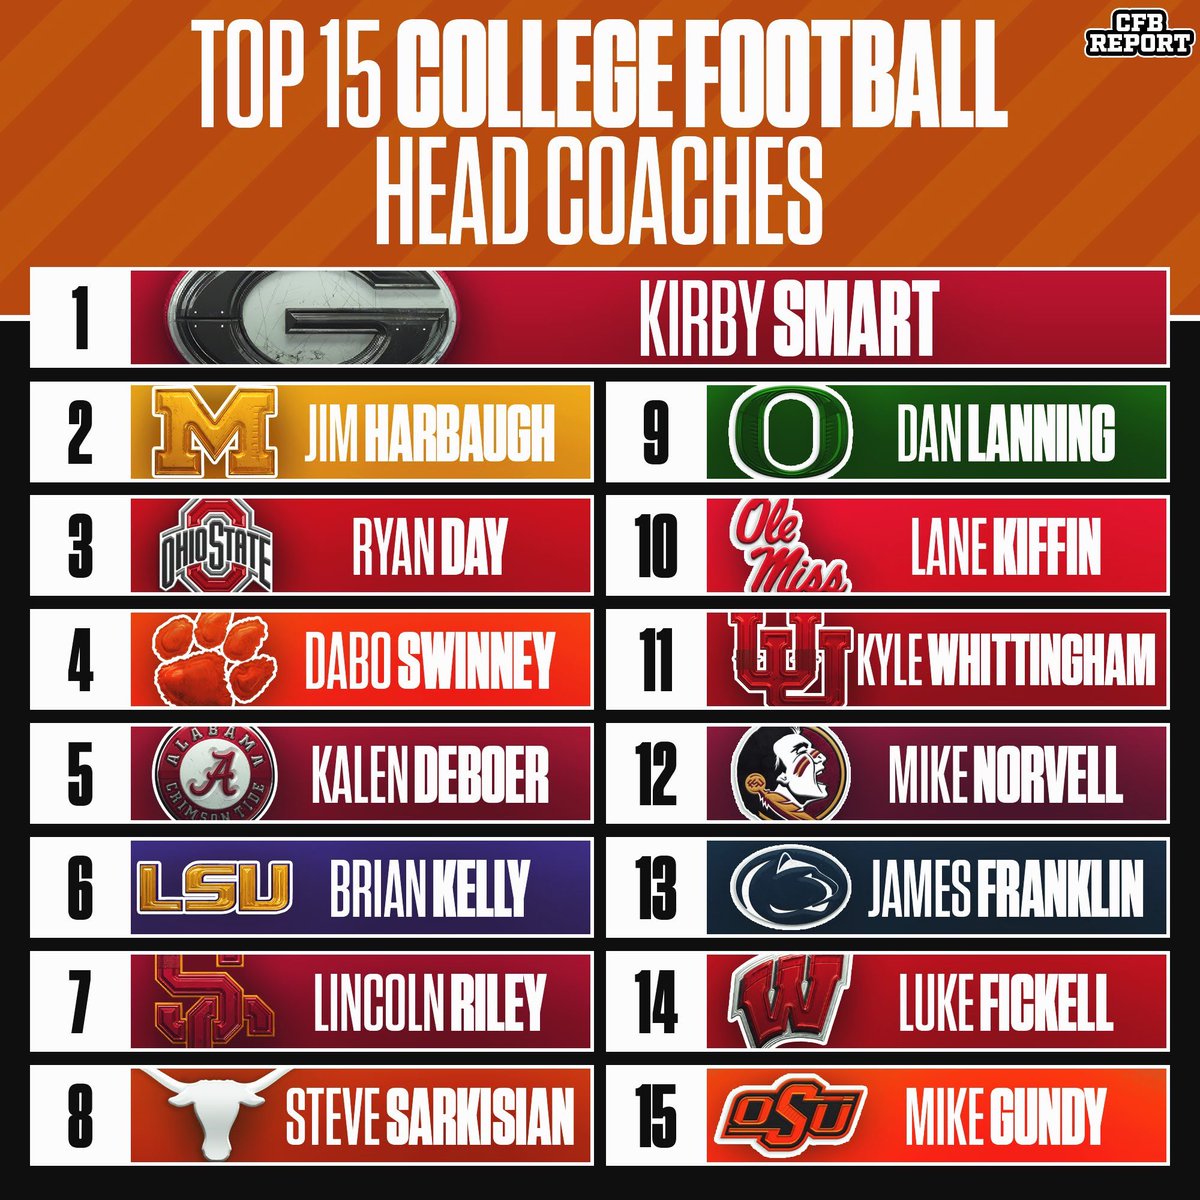 The Top 15 Head Coaches in College Football 🏈